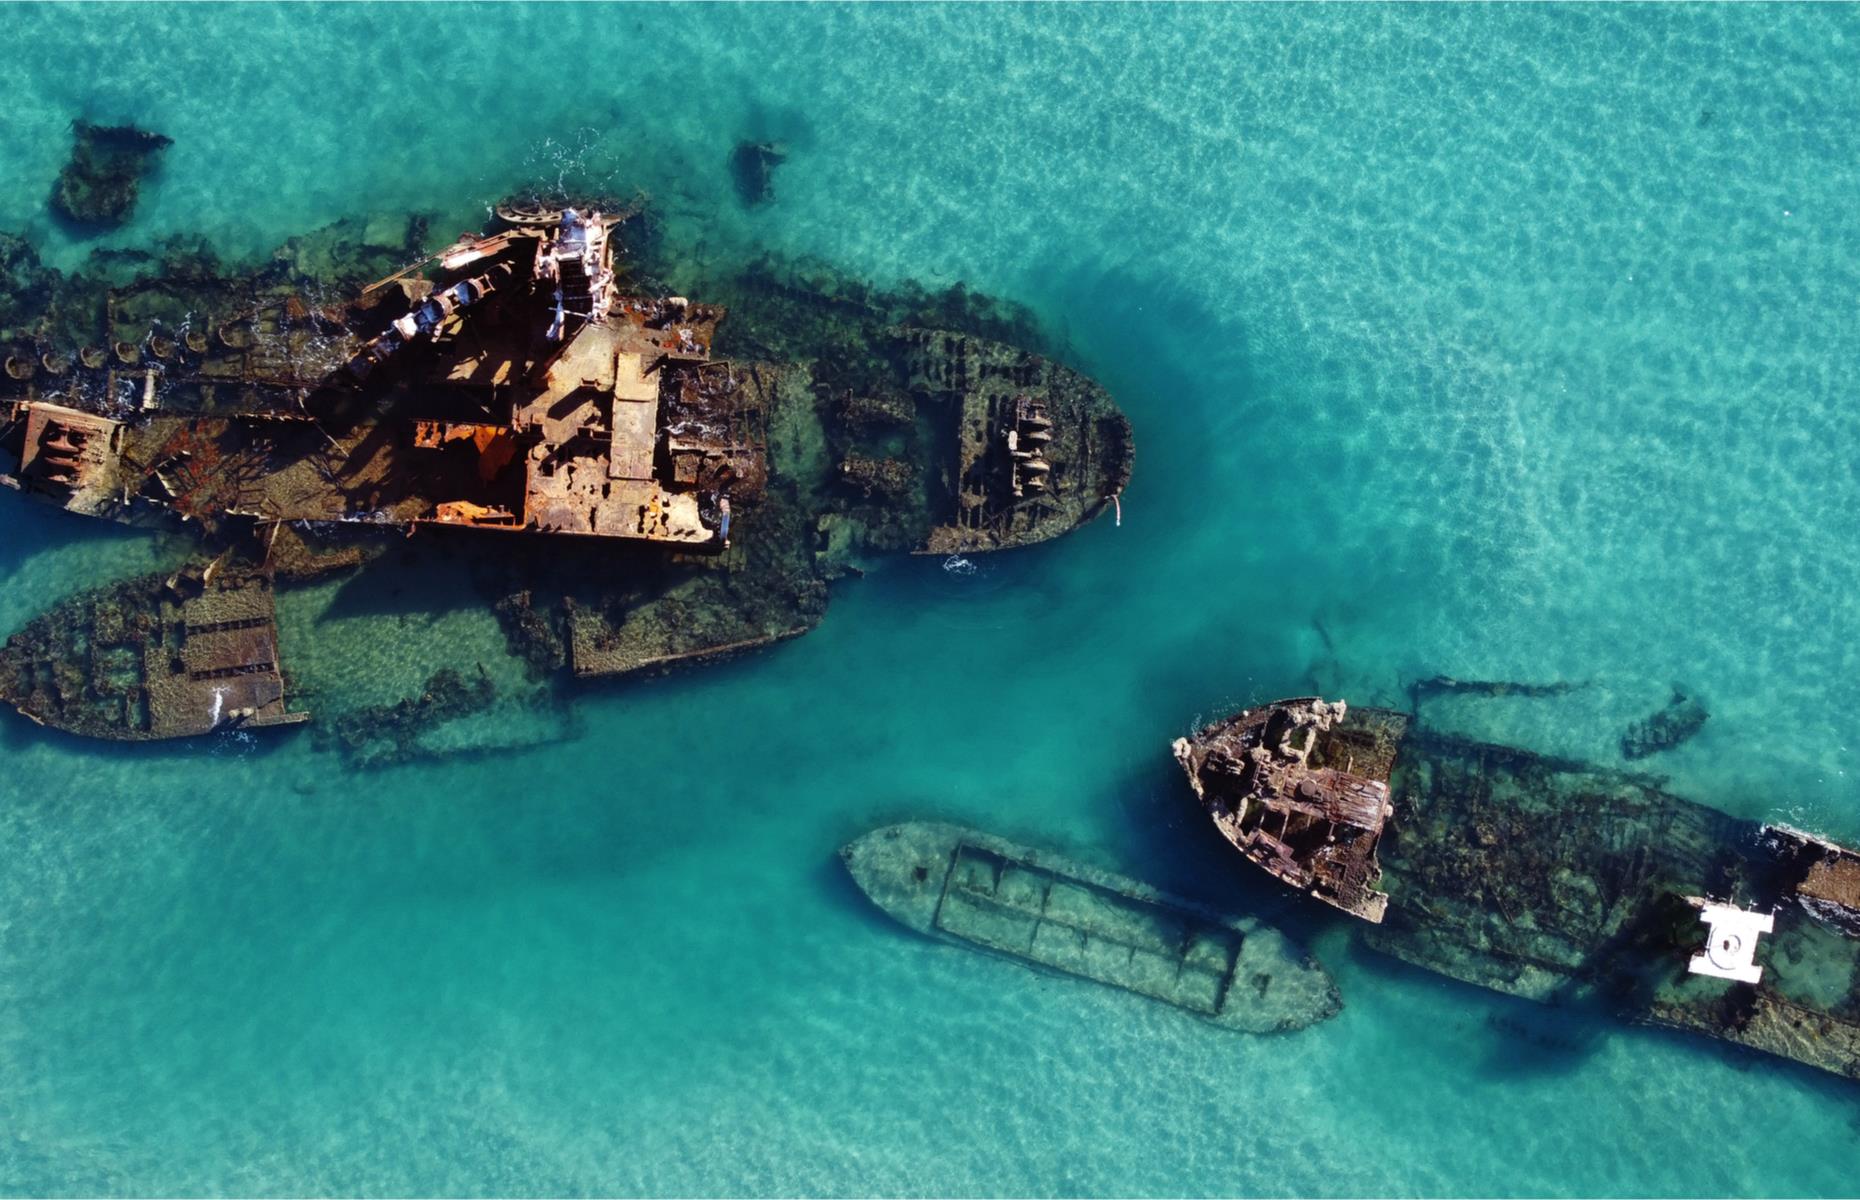 A group of scuttled ships lie just off Moreton Island, north of Tangalooma Island Resort. Known as the Tangalooma Wrecks, the decommissioned vessels were sank by the Queensland government between 1963 and 1984 to create a safe anchorage spot for boat owners. Their water-logged carcasses are now a popular dive and snorkeling site and are alive with assorted reef fish and coral formations, and drawing other marine life including dolphins, wobbegongs and dugongs.